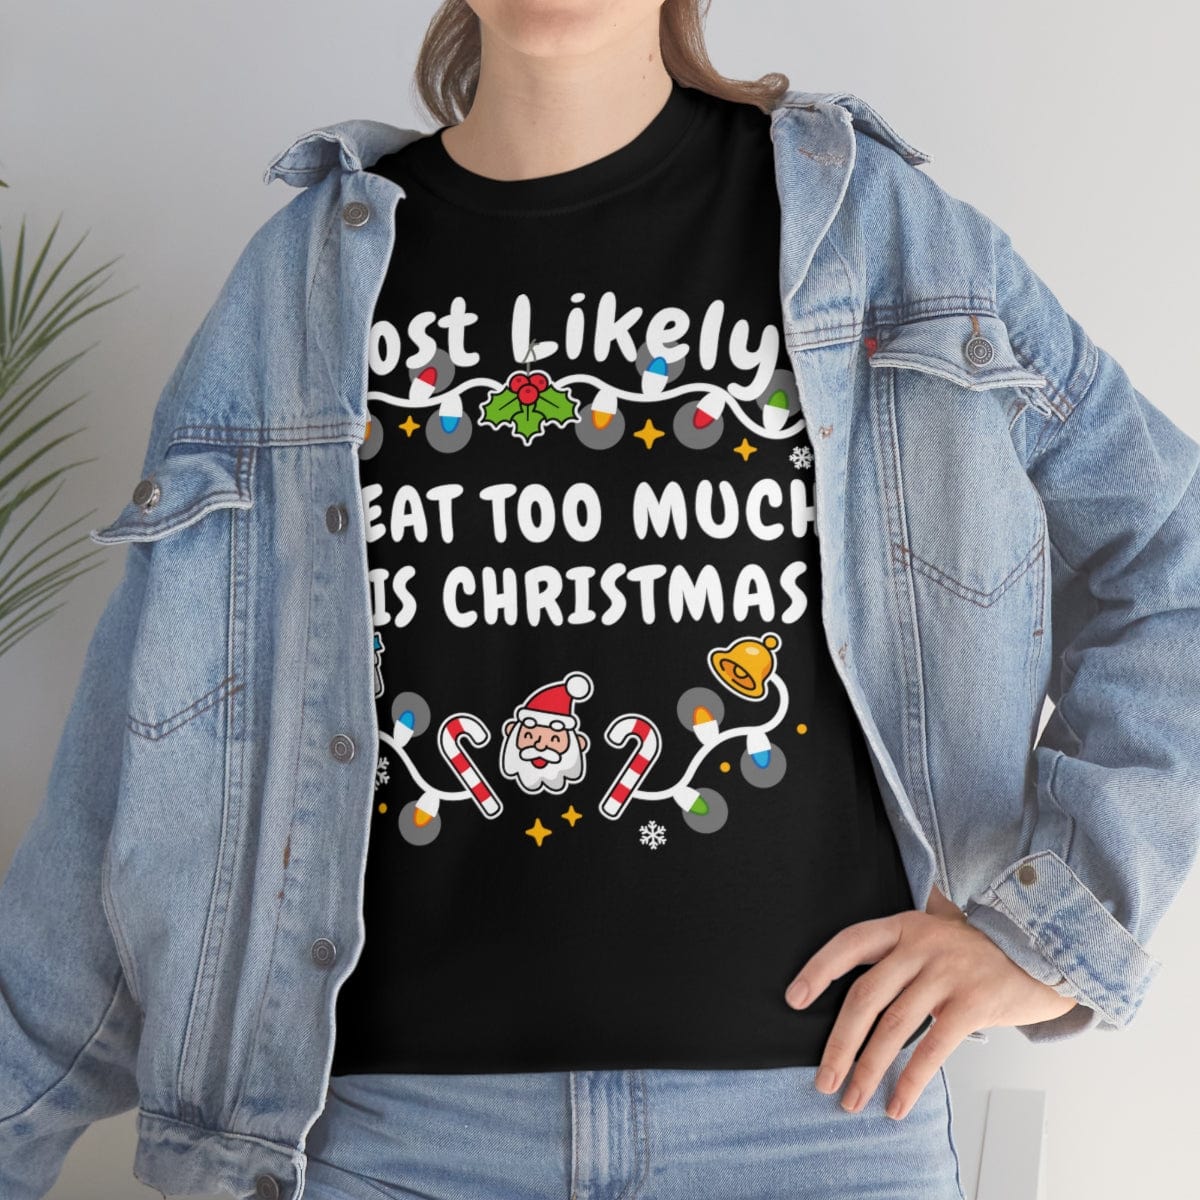 TO EAT TOO MUCH THIS CHRISTMAS